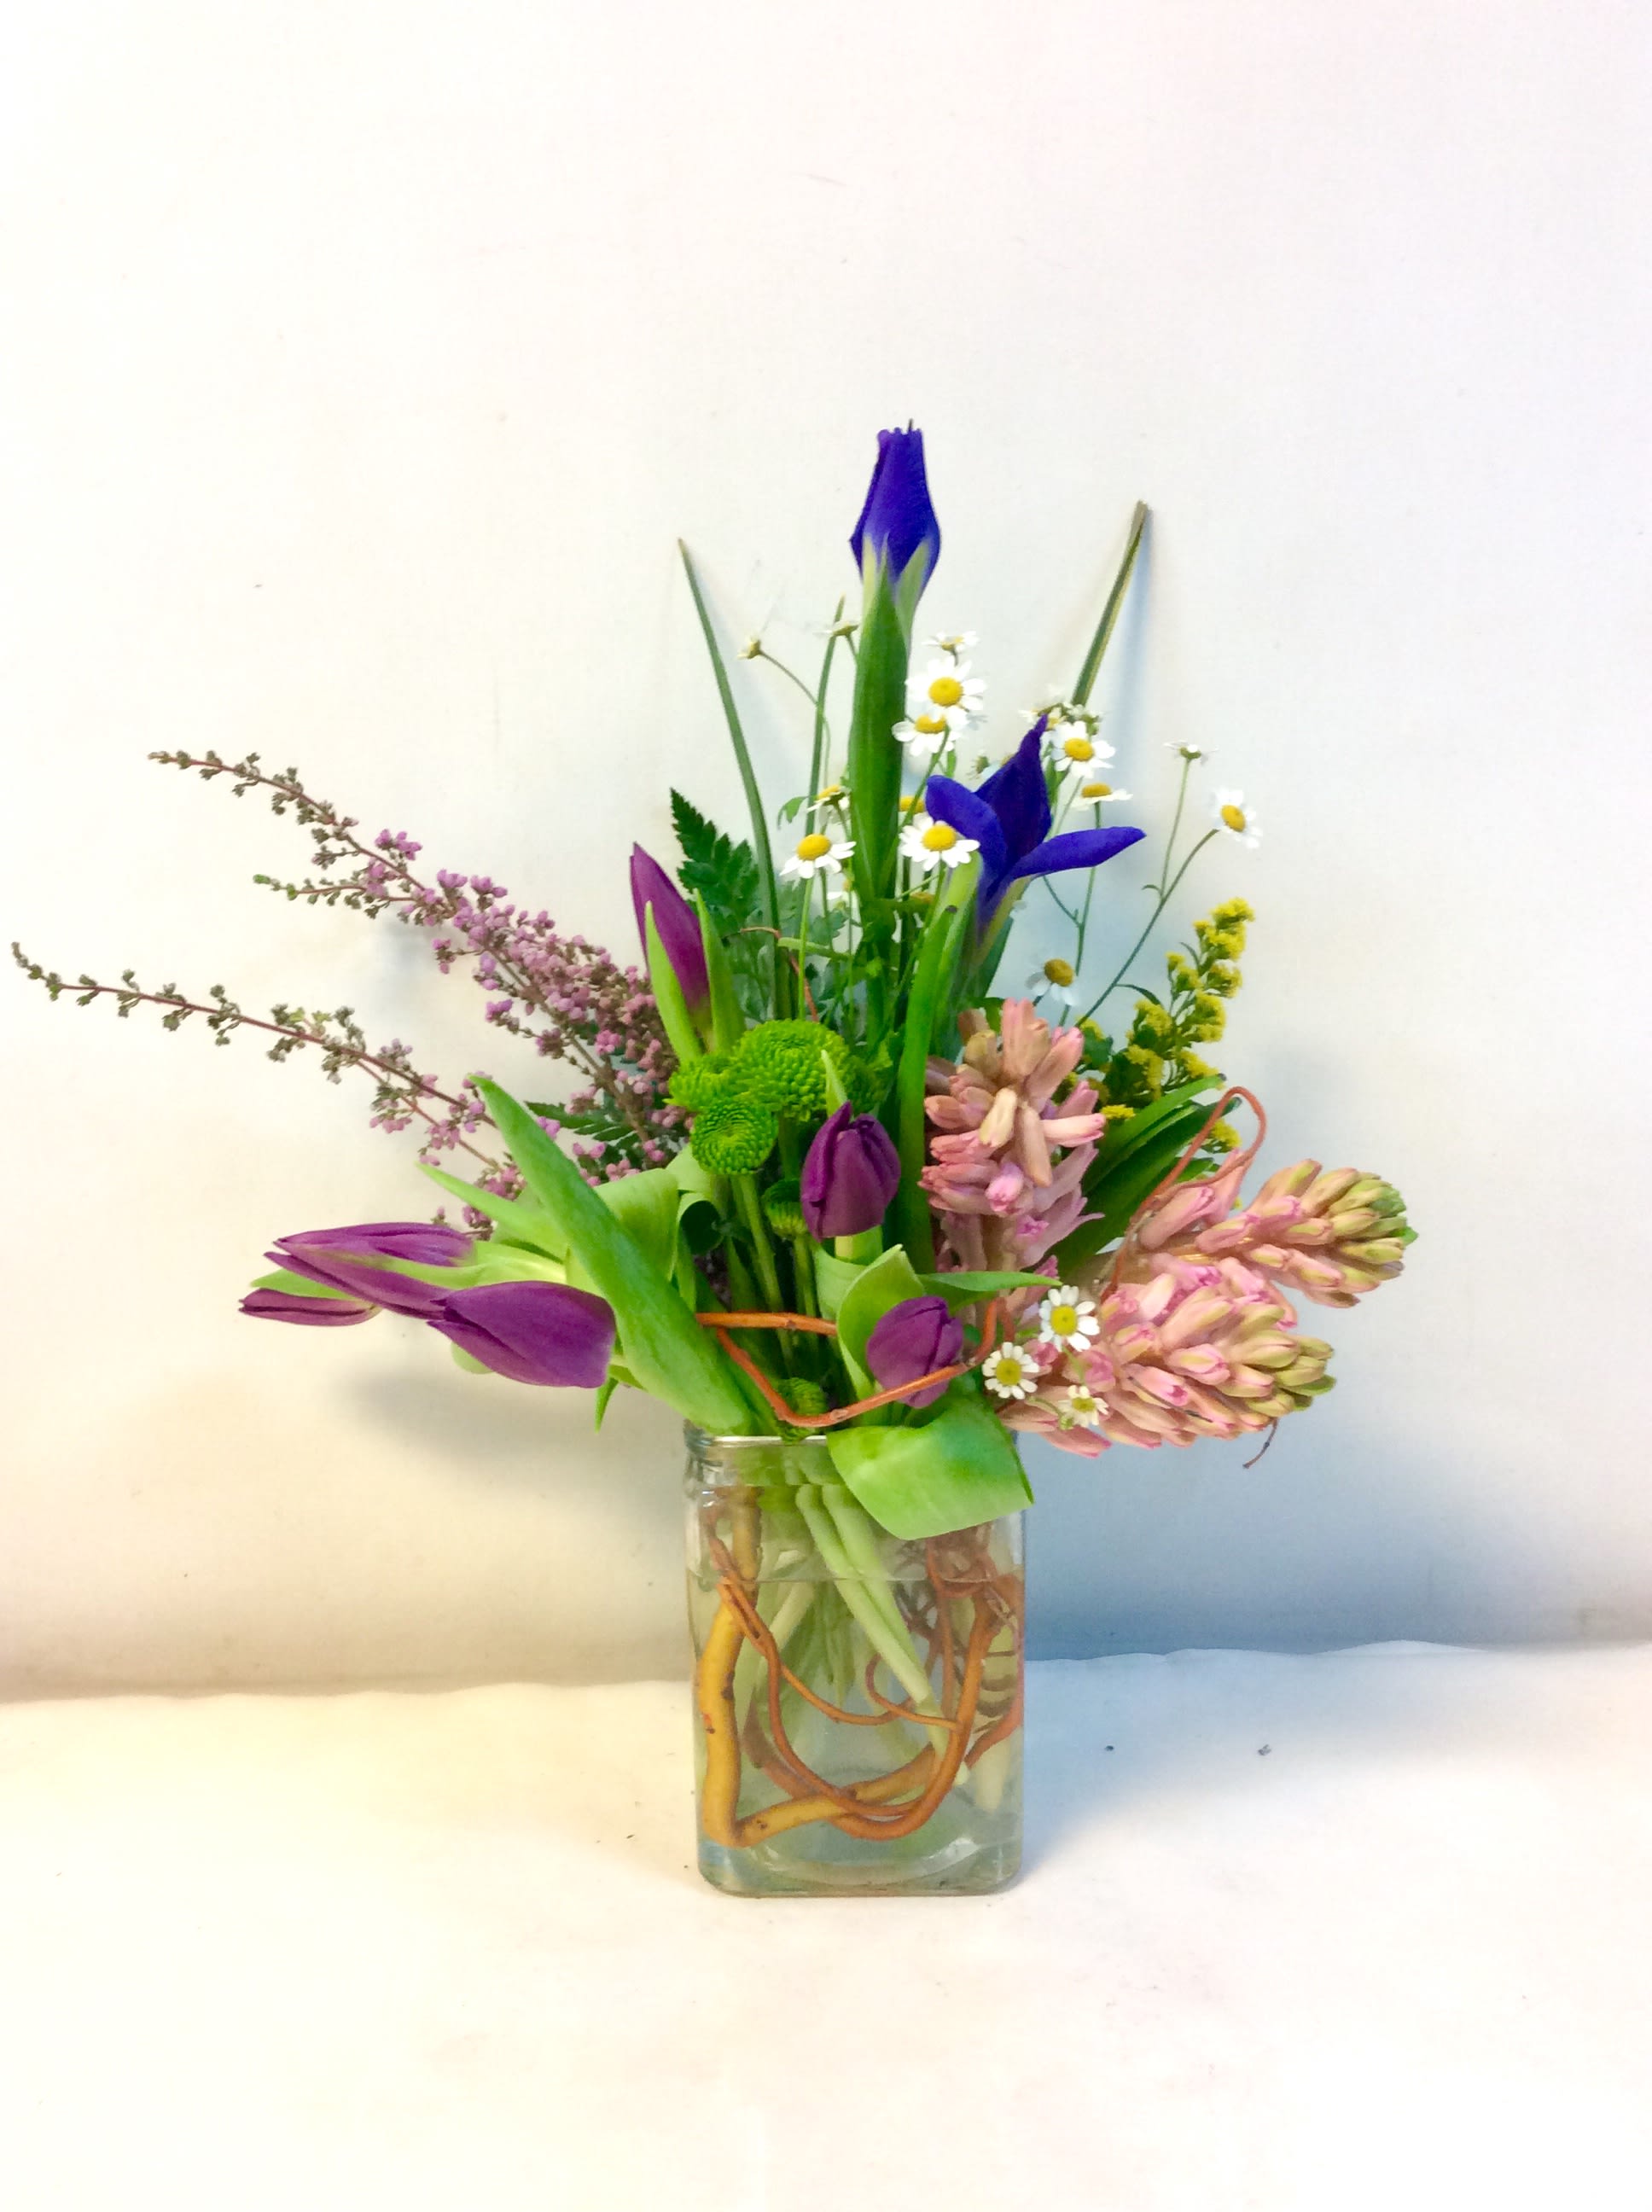 Spring Spectacular - This rectangle vase is jammed full of spring!  Hyacinth, Feverfew and Tulips in bright uplifting colors bring a refreshing smile. HFS-1055